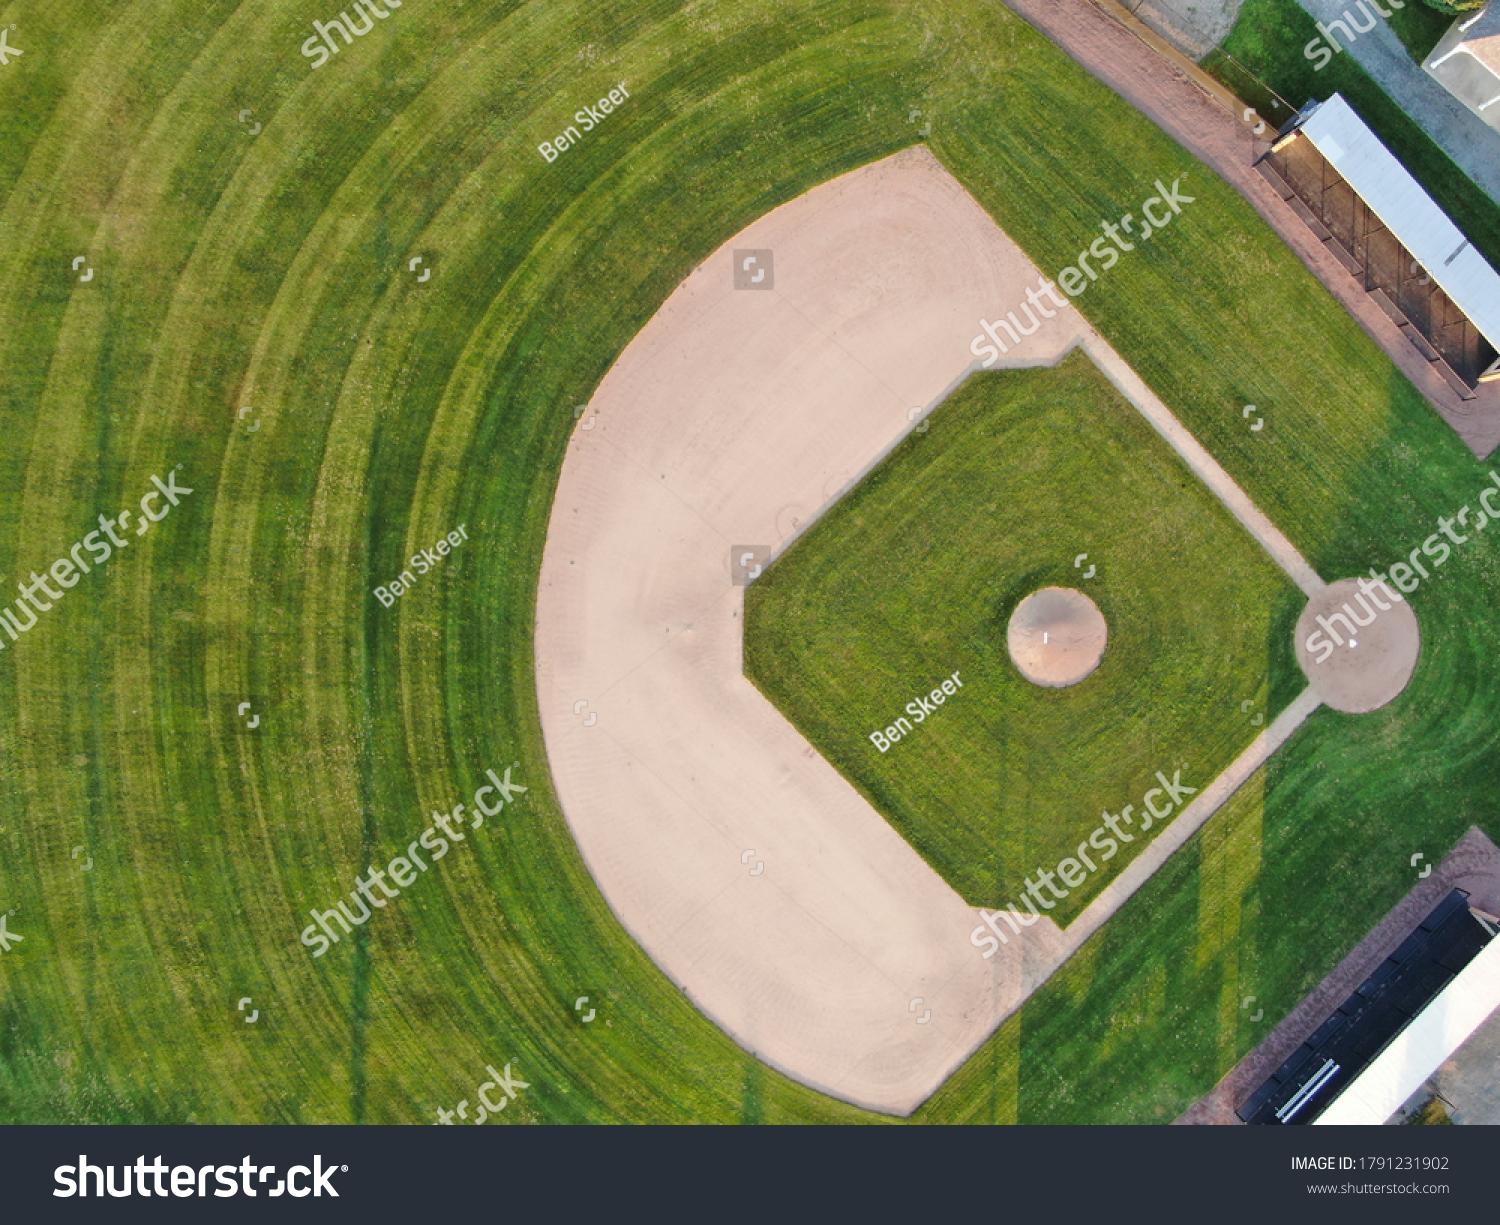 Baseball diamond in pristine condition during the day  #1791231902